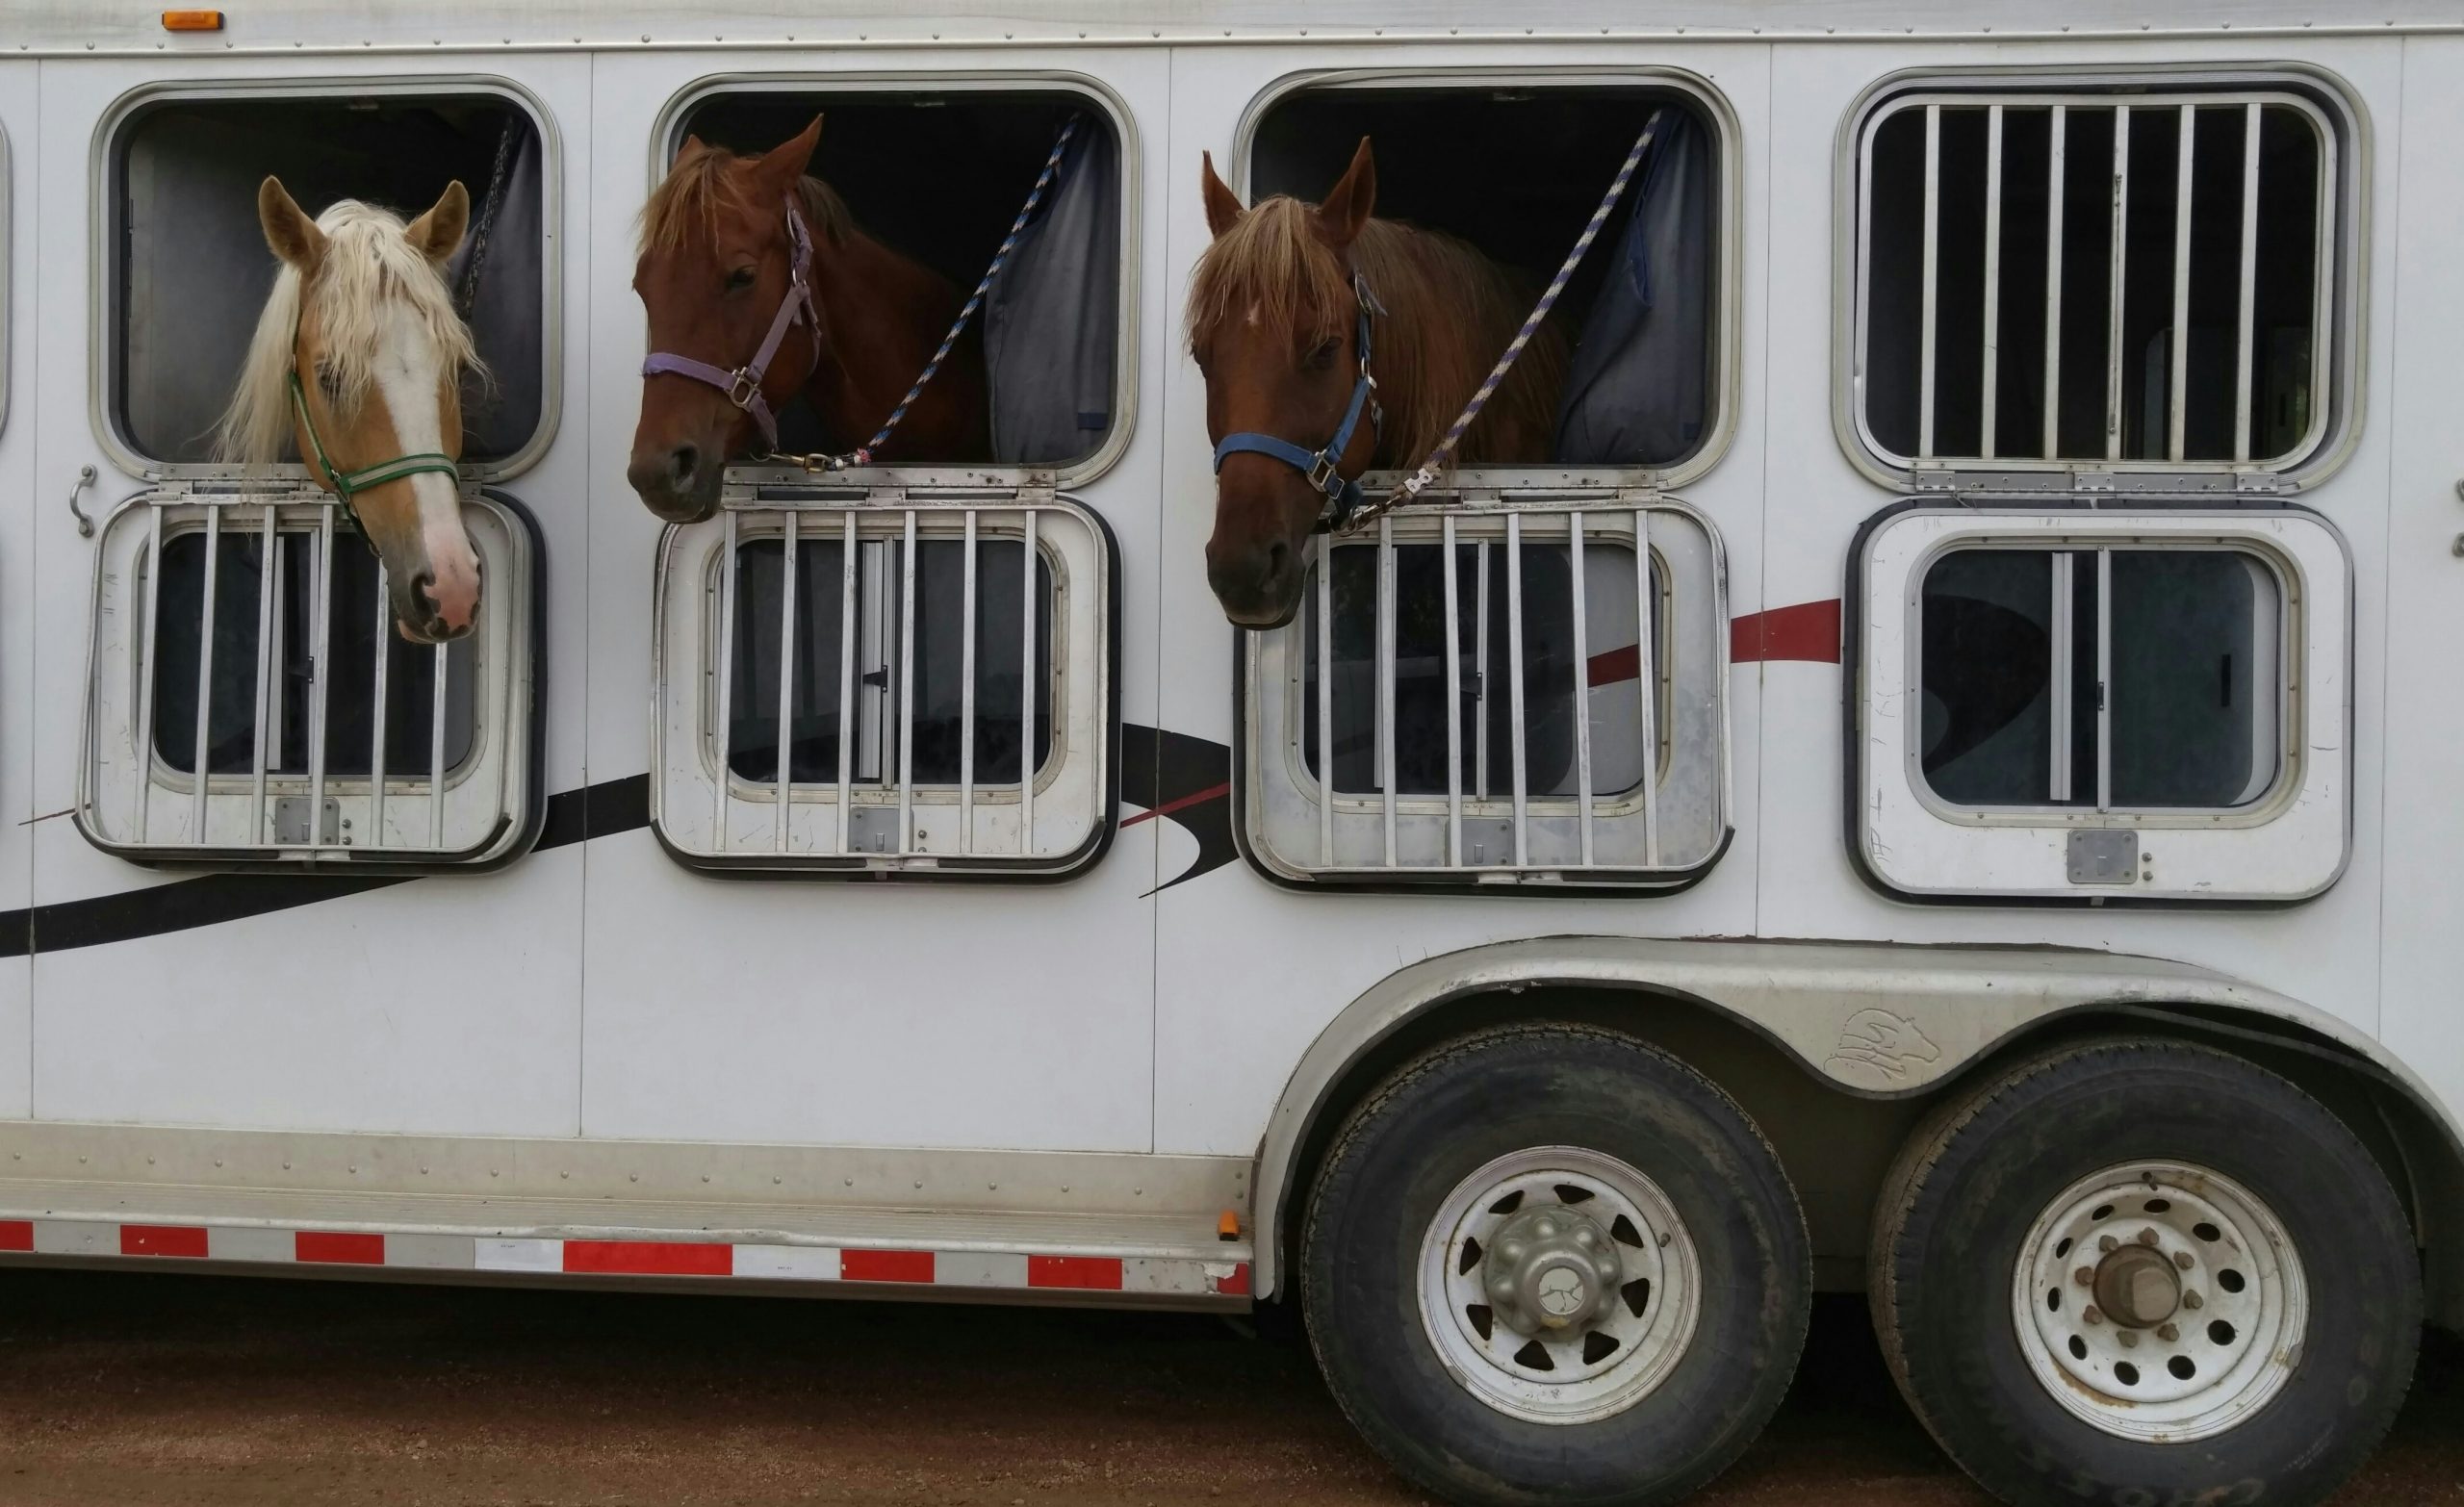 Horses sticking their heads out of the open window of a metal horse trailer